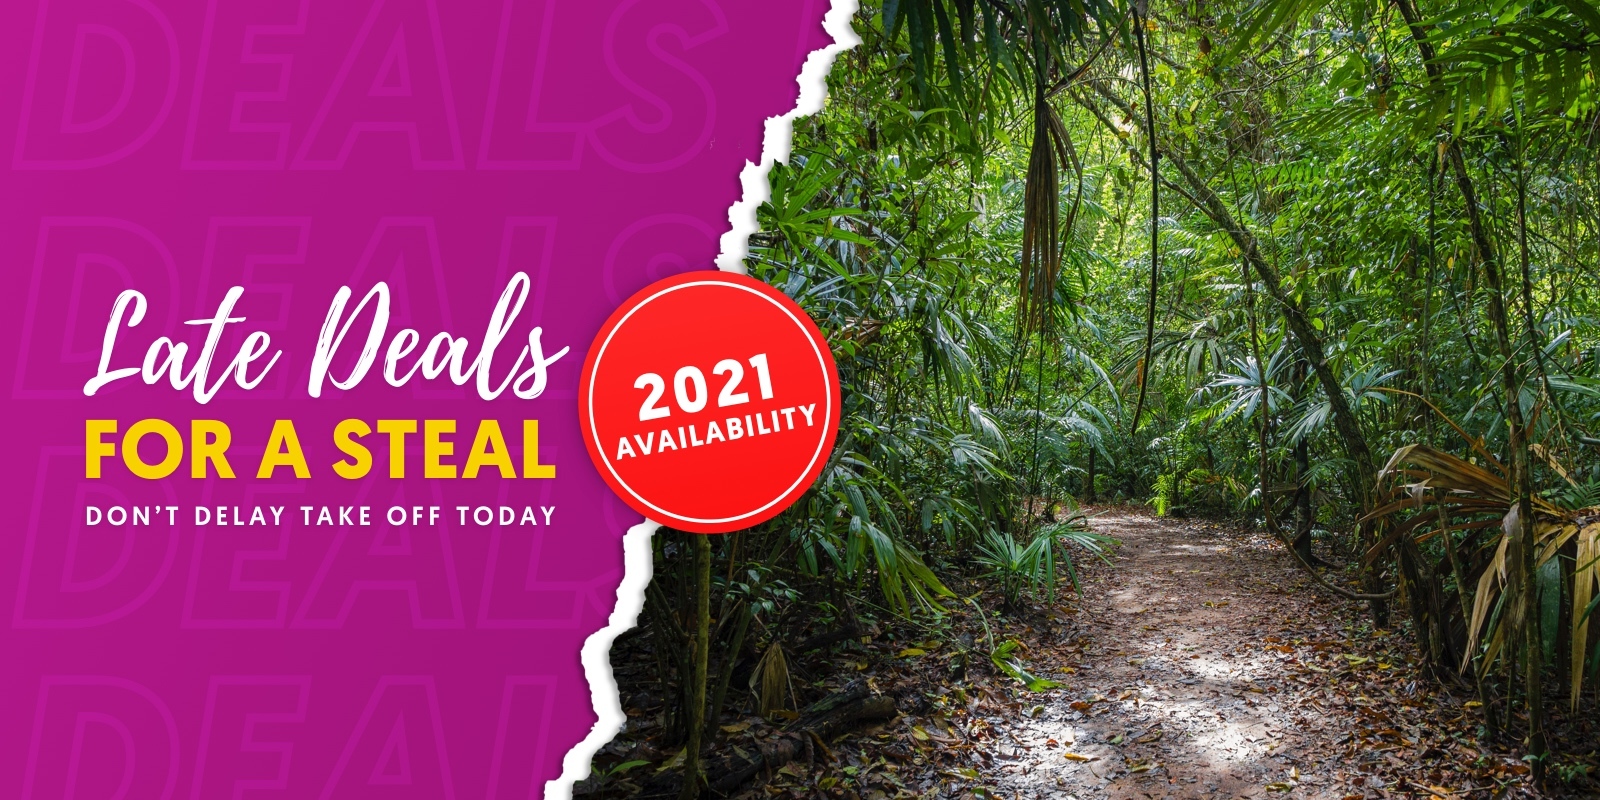 Travel blog: Pick Your I’m A Celeb Faves And We’ll Reveal Your Perfect 2021 Late Deals Destination